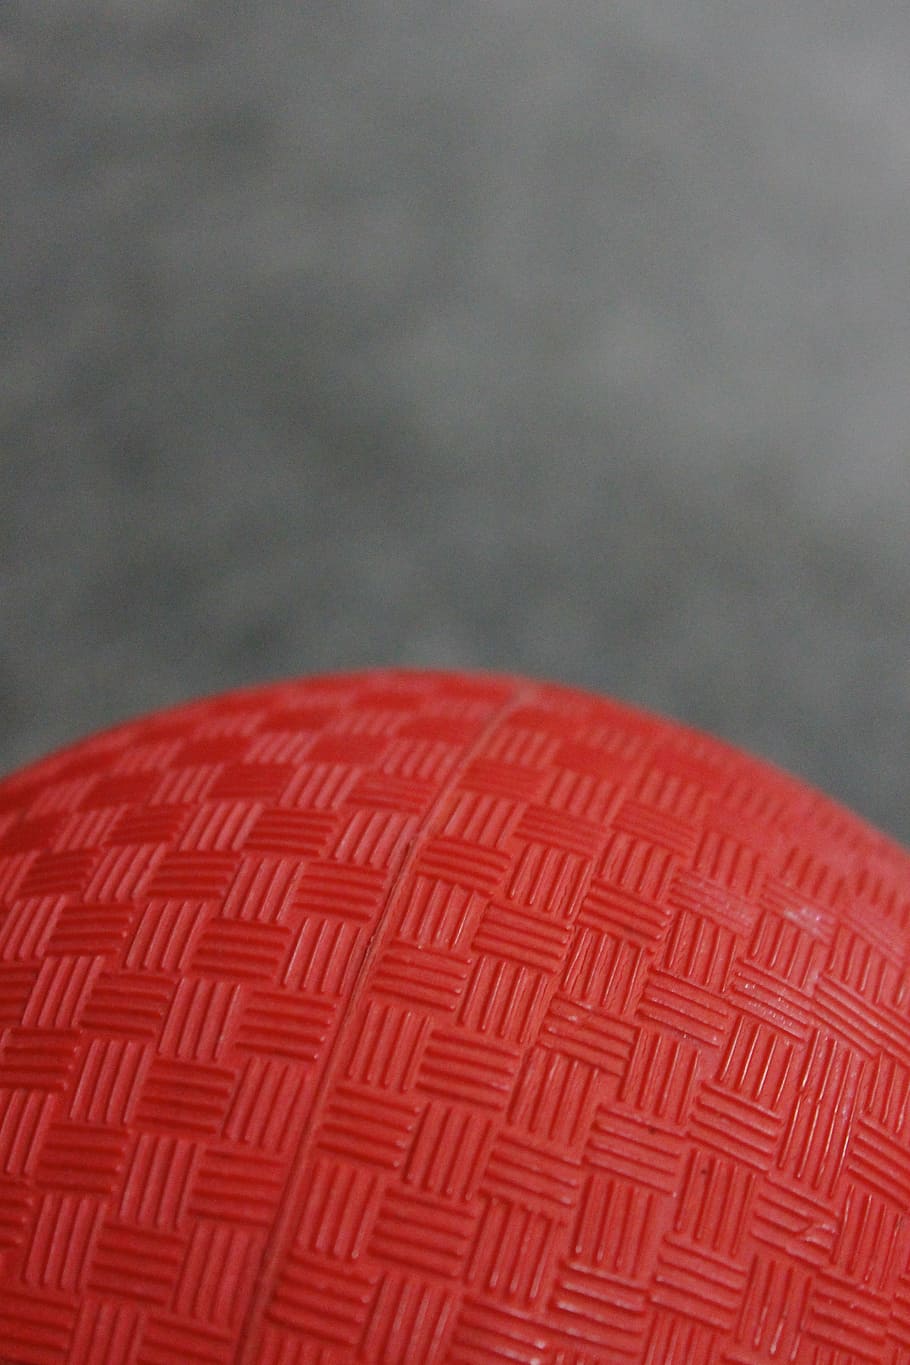 dodgeball, red, ball, play, recreation, sports, game, competition, pattern, close-up